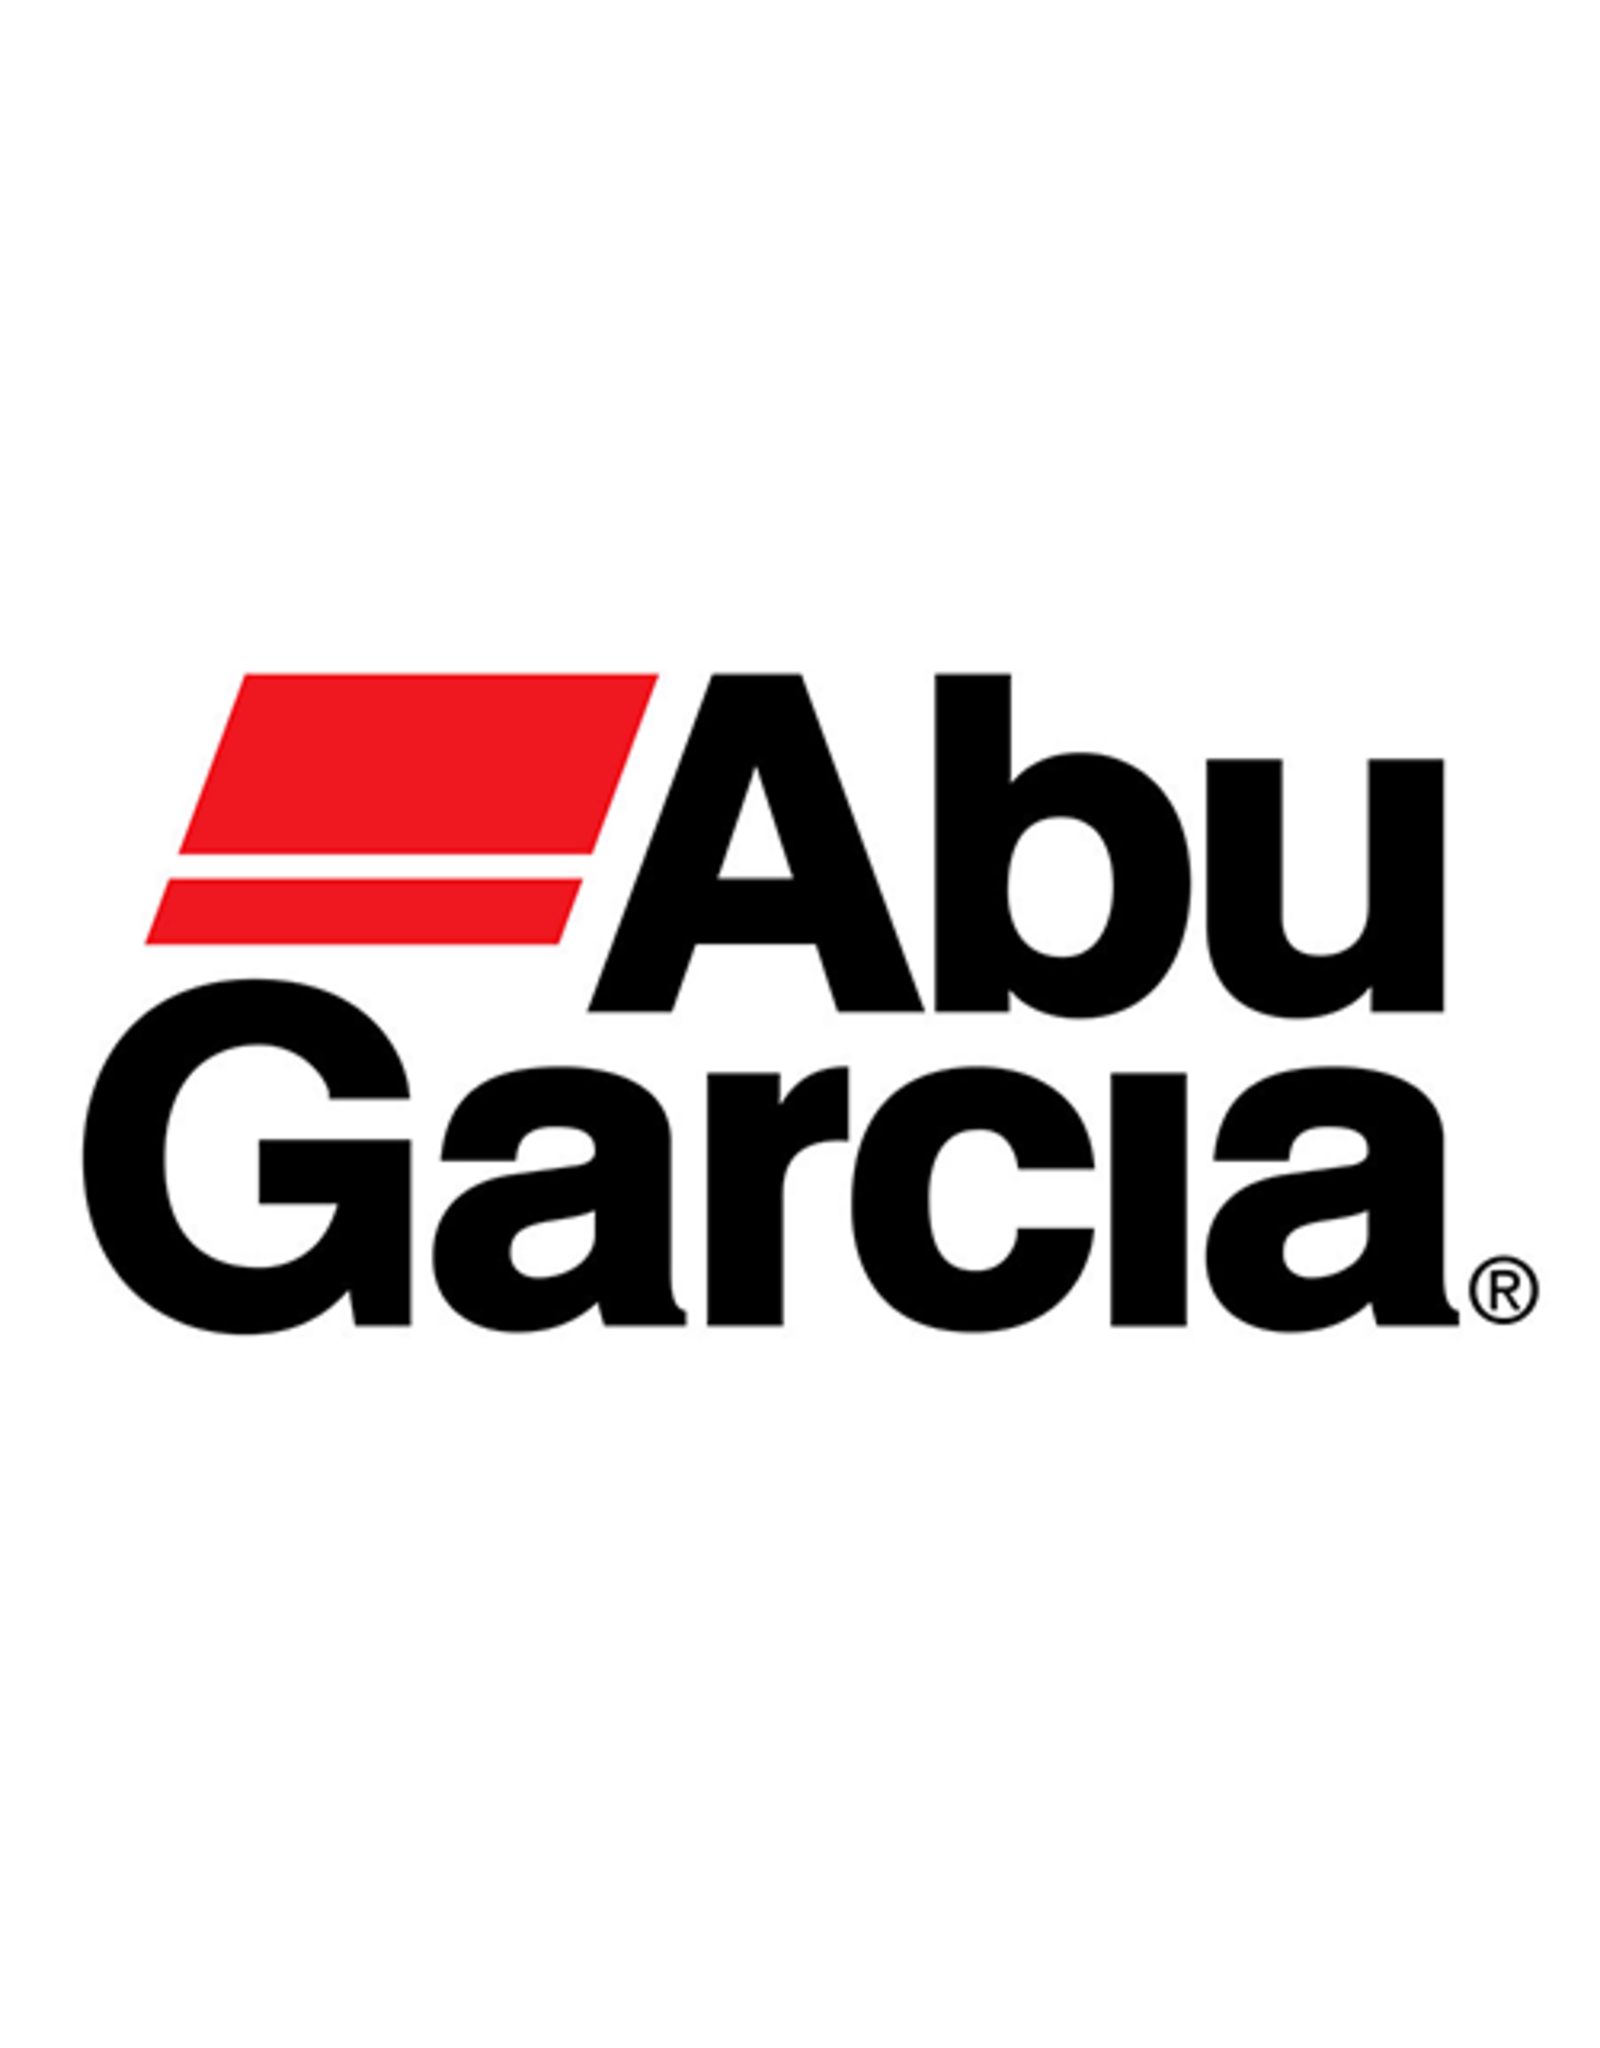 Abu Garcia 1290588  FRONT COVER